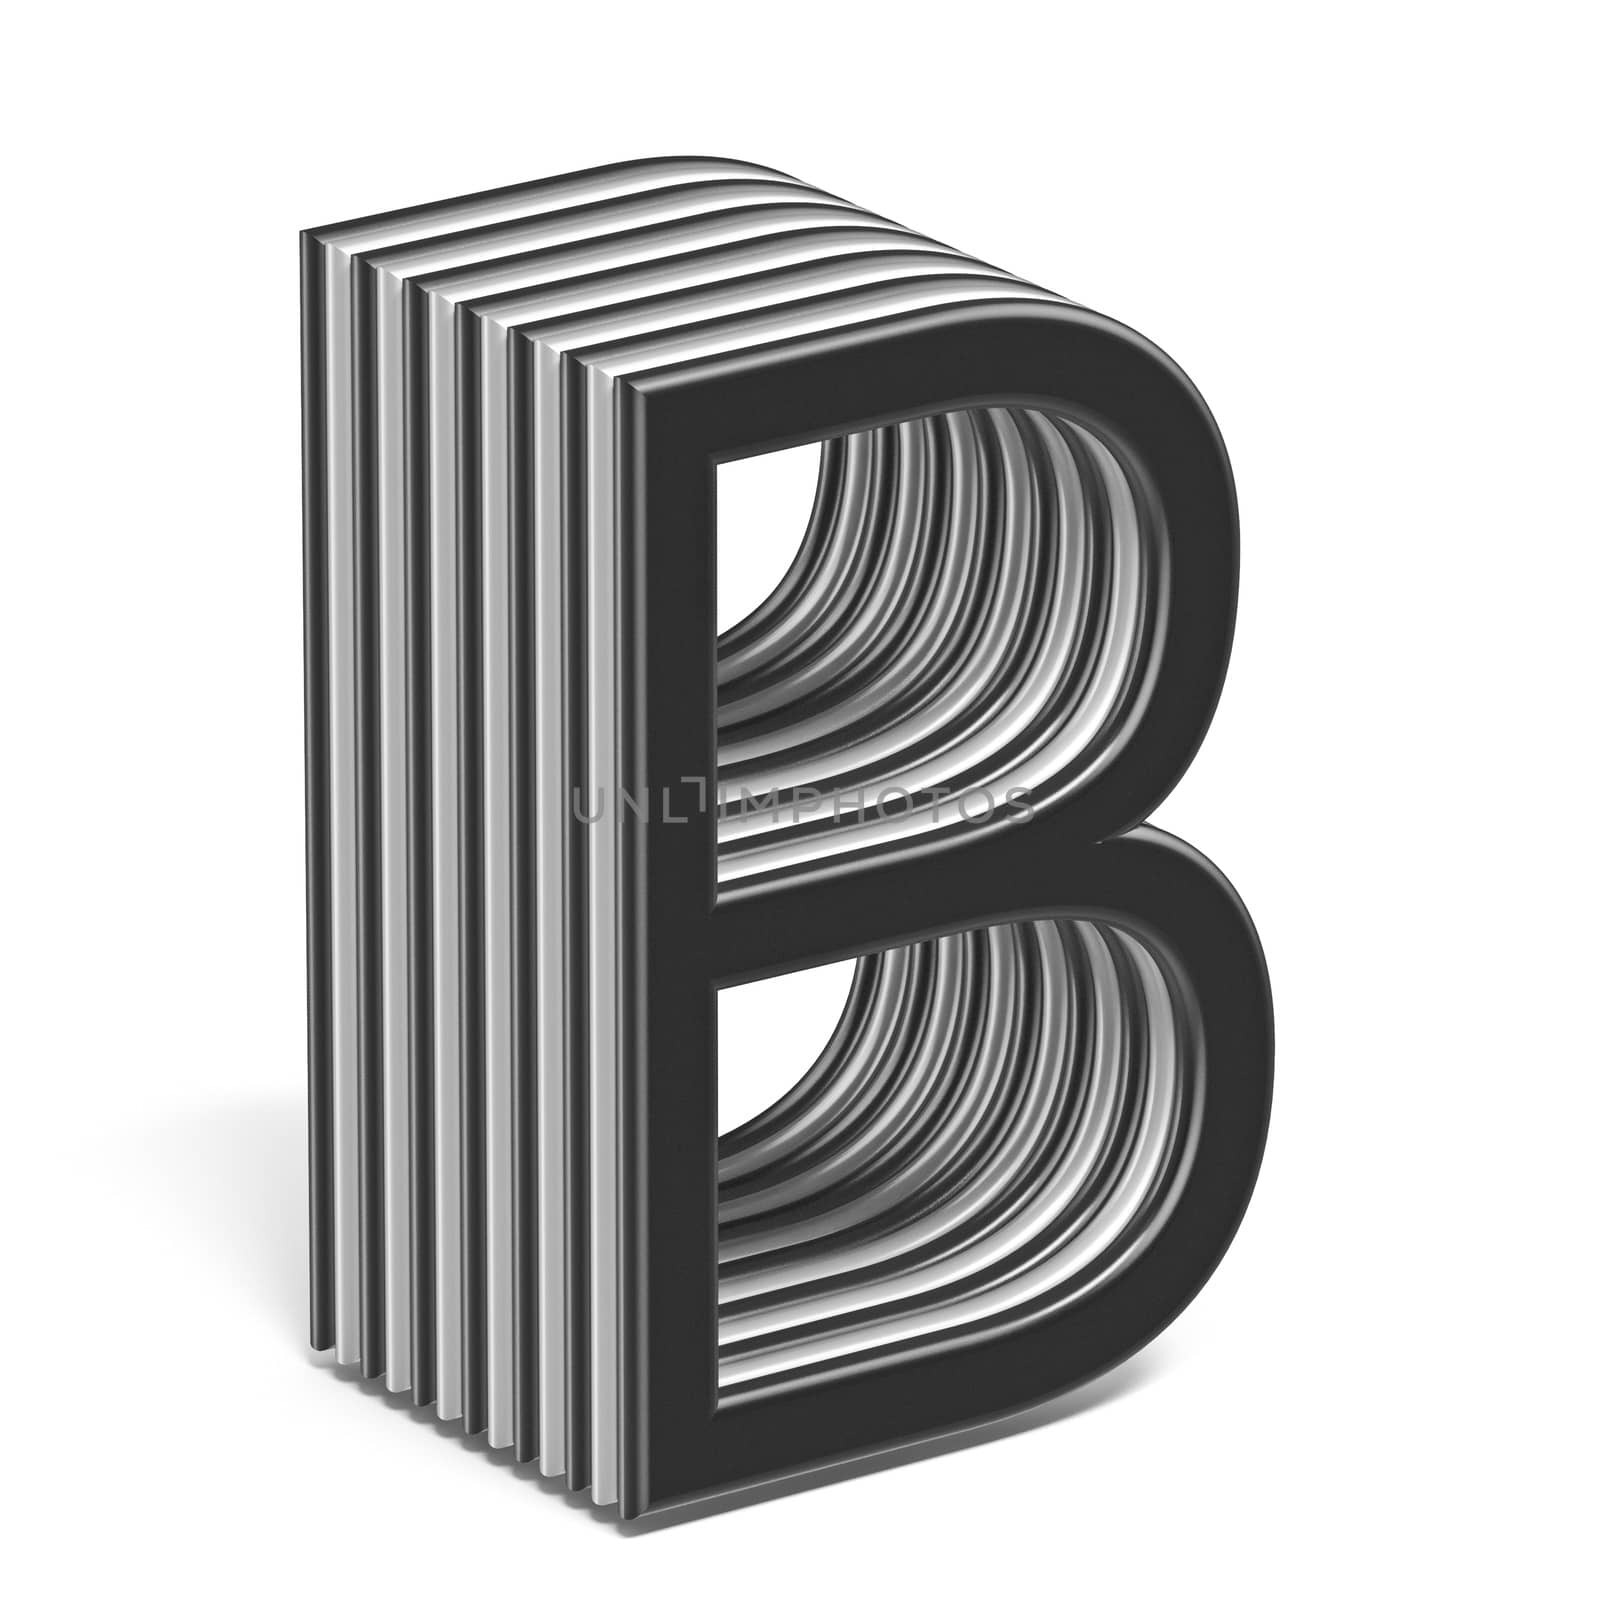 Black and white layered font Letter B 3D by djmilic